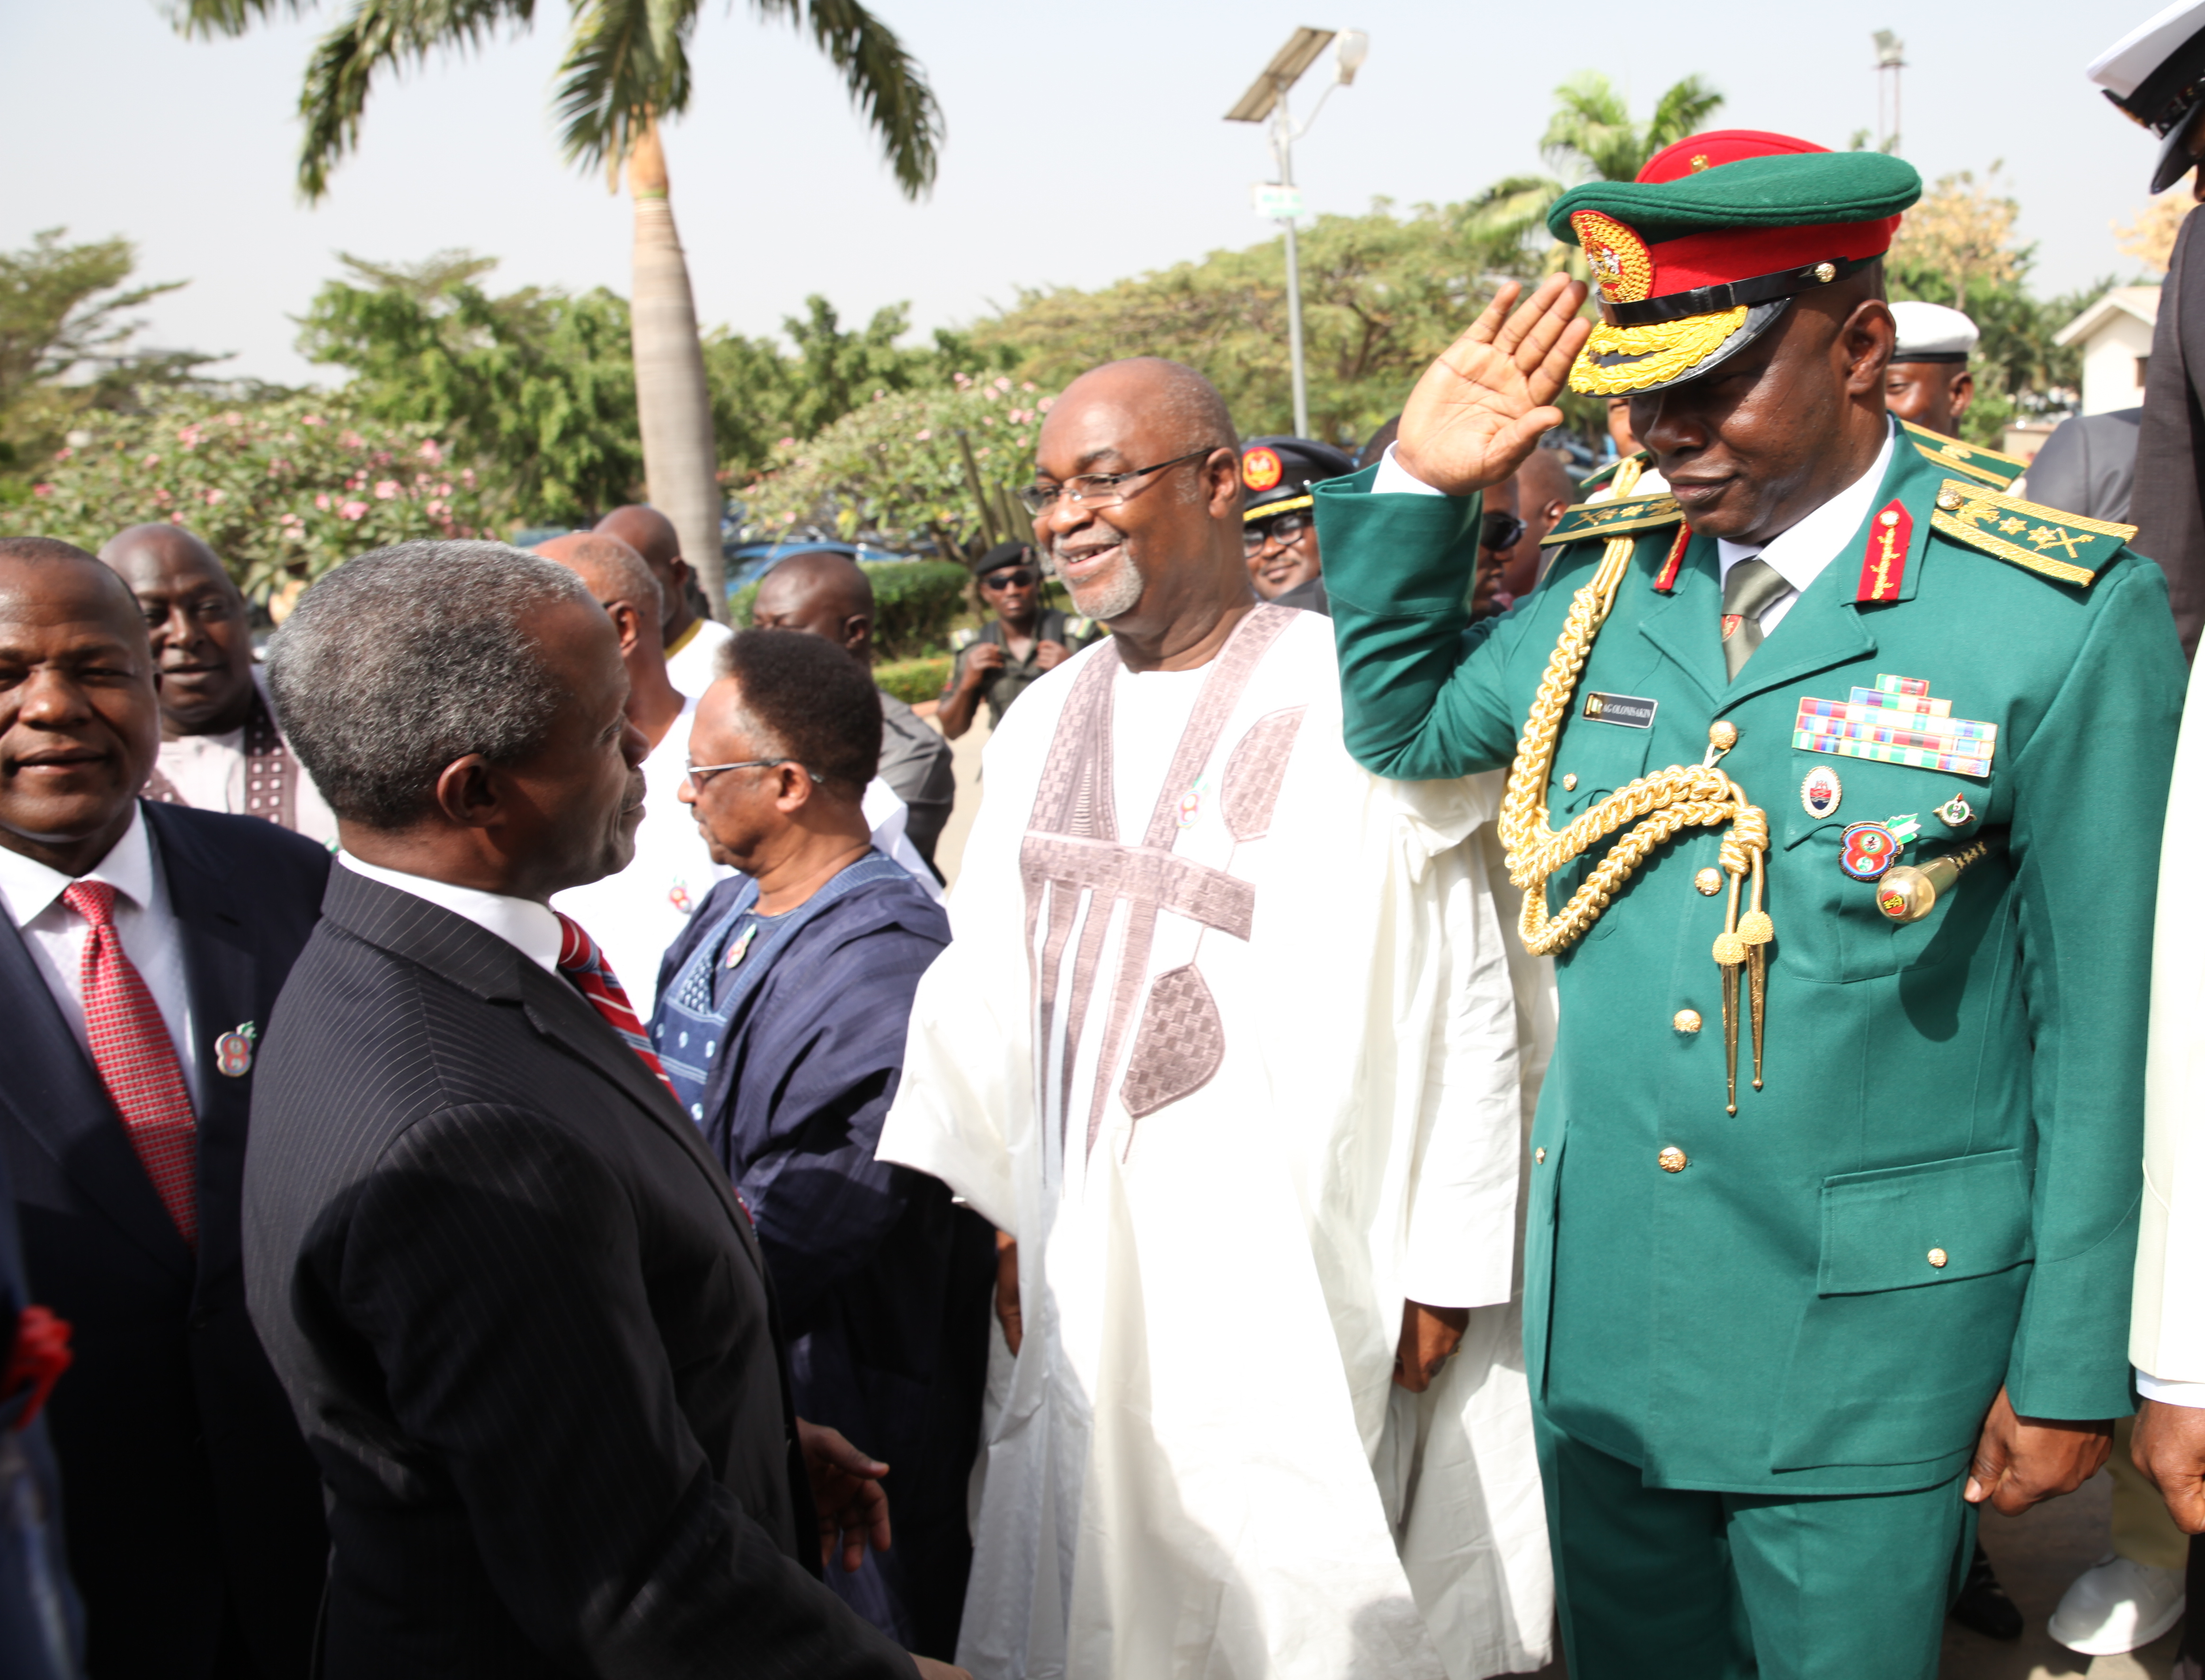 VP Osinbajo Attends 2016 Armed Forces Remembrance Day Celebration Inter-Denominational Church Service On 10/01/2016